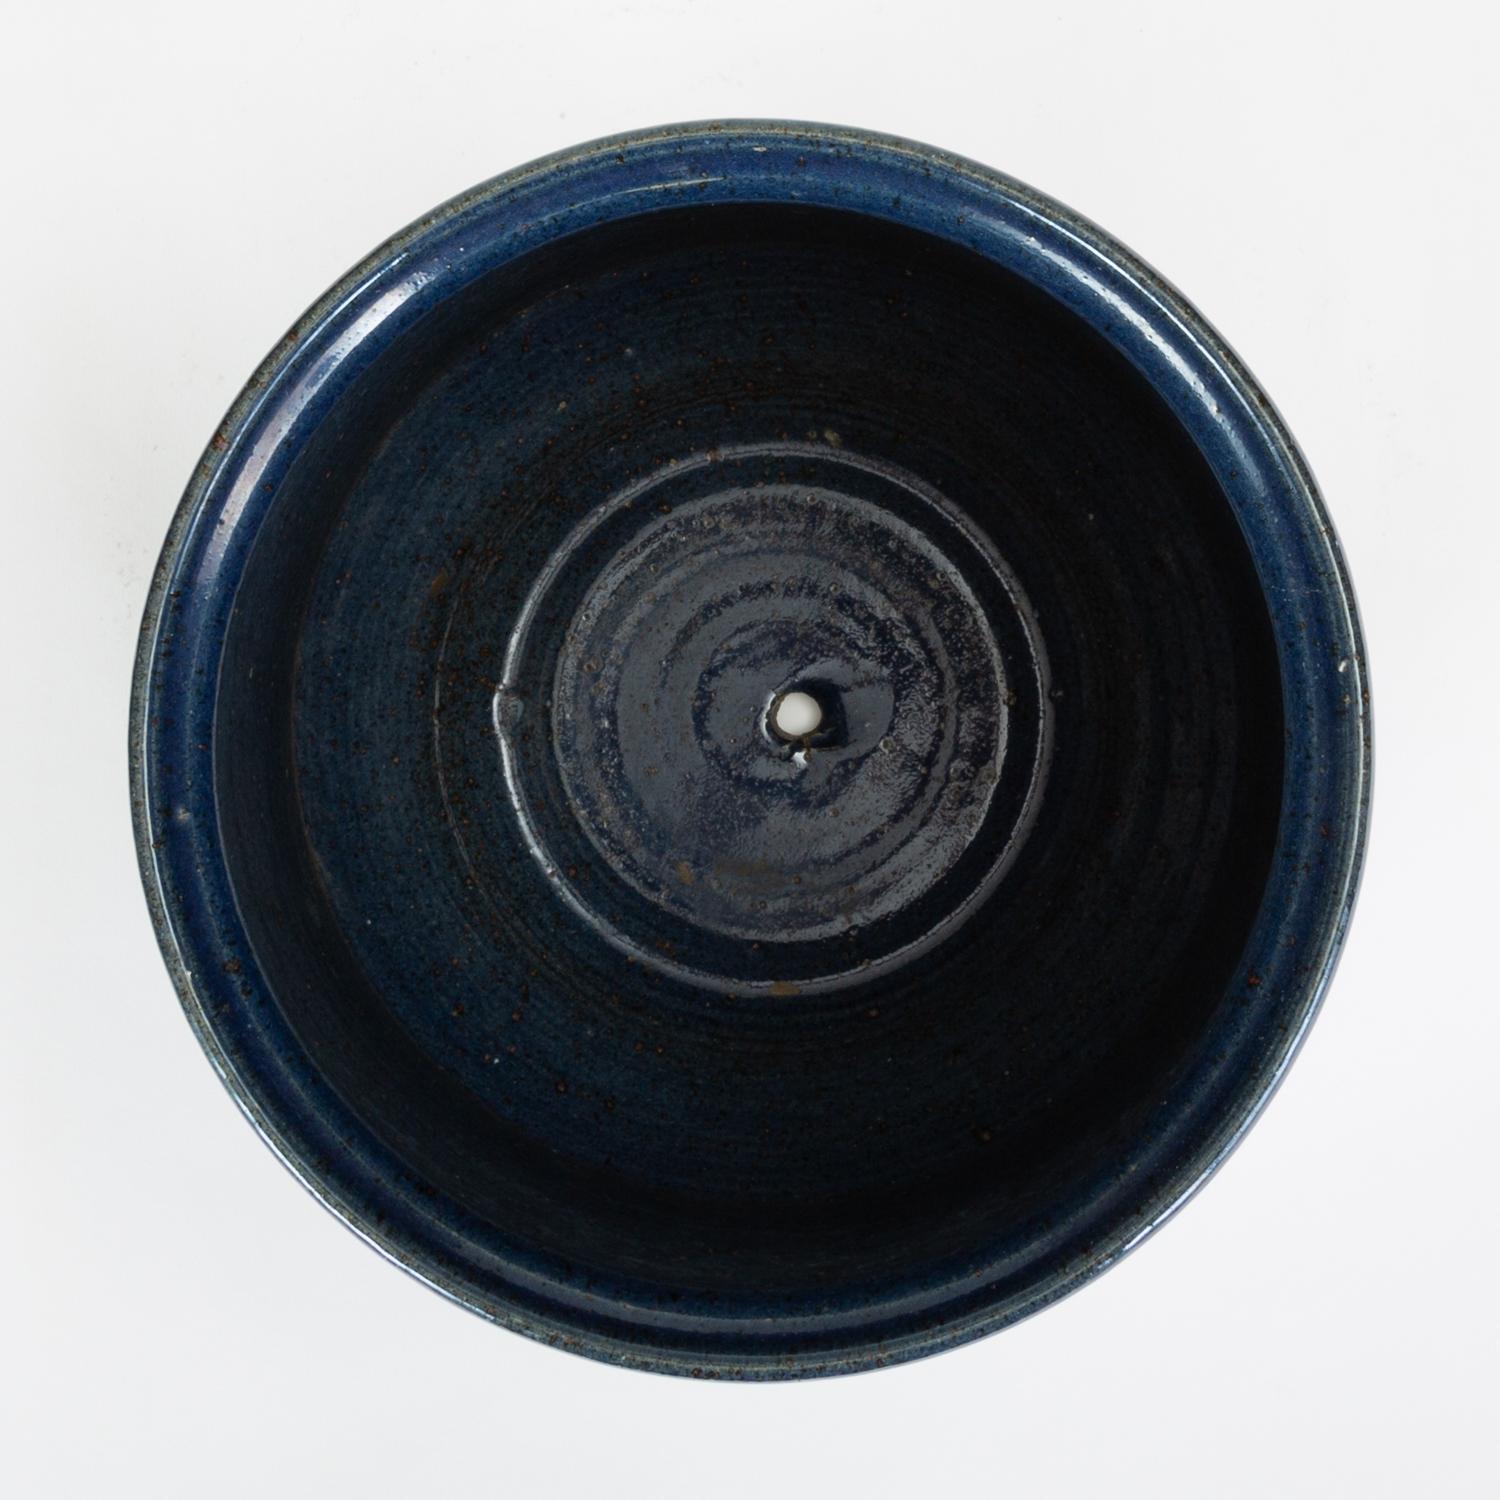 Stoneware Pair of Blue-Glazed Earthgender Bowl Planters, David Cressey and Robert Maxwell